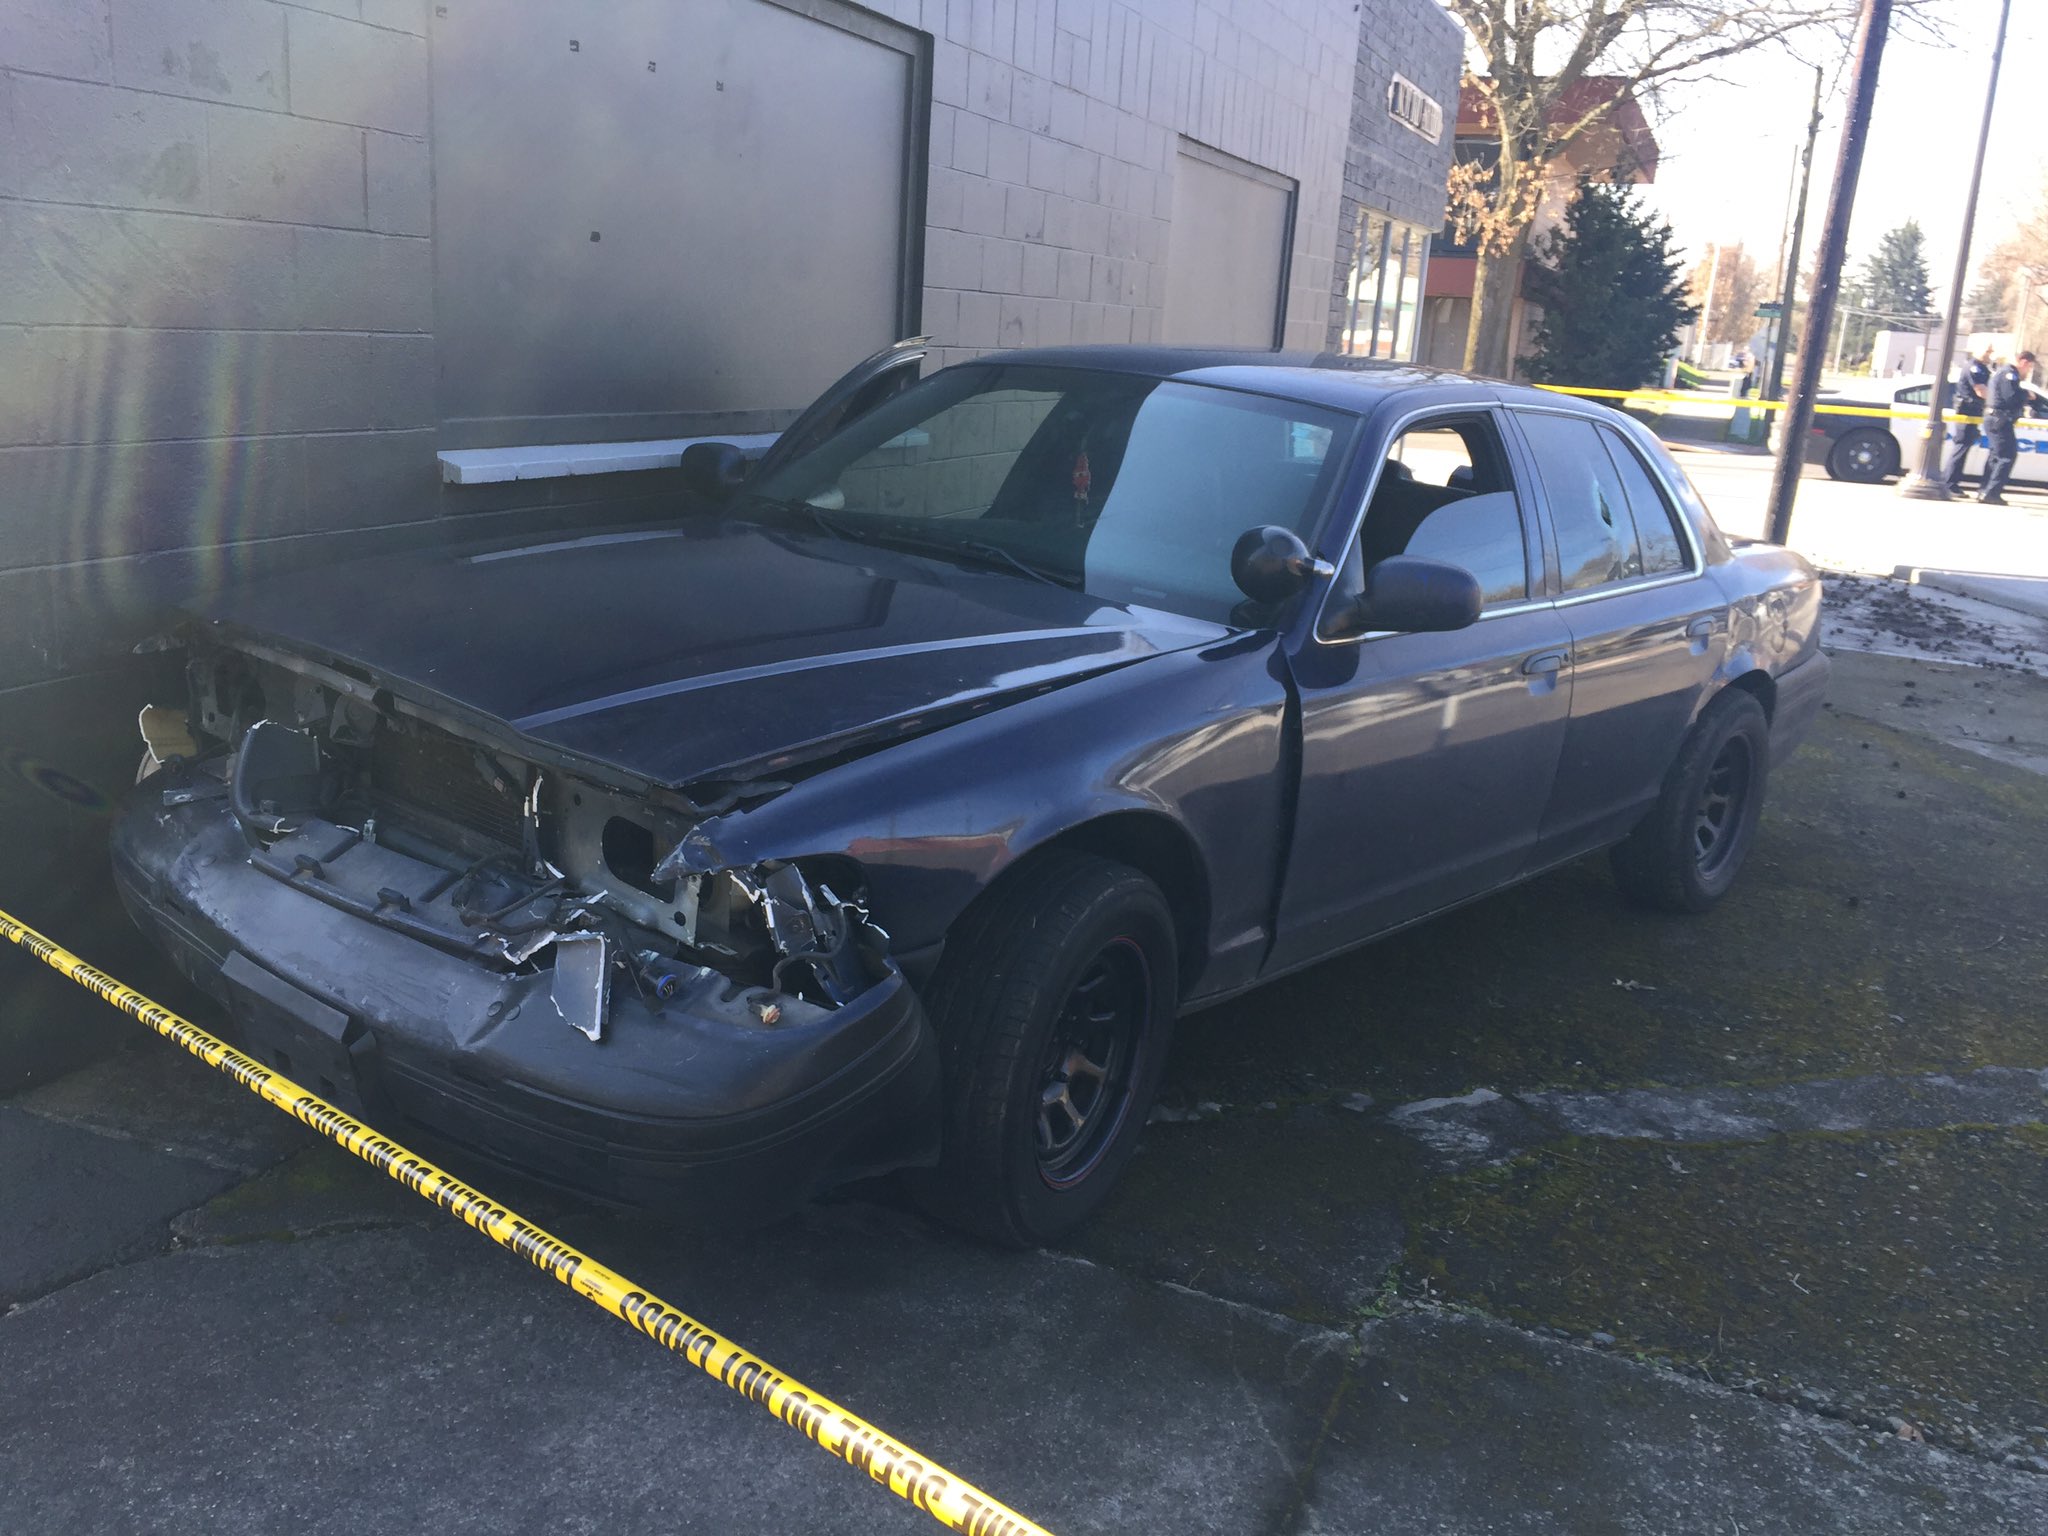 A car that was apparently involved in Saturday's police shooting shows damage after it crashed several blocks away.